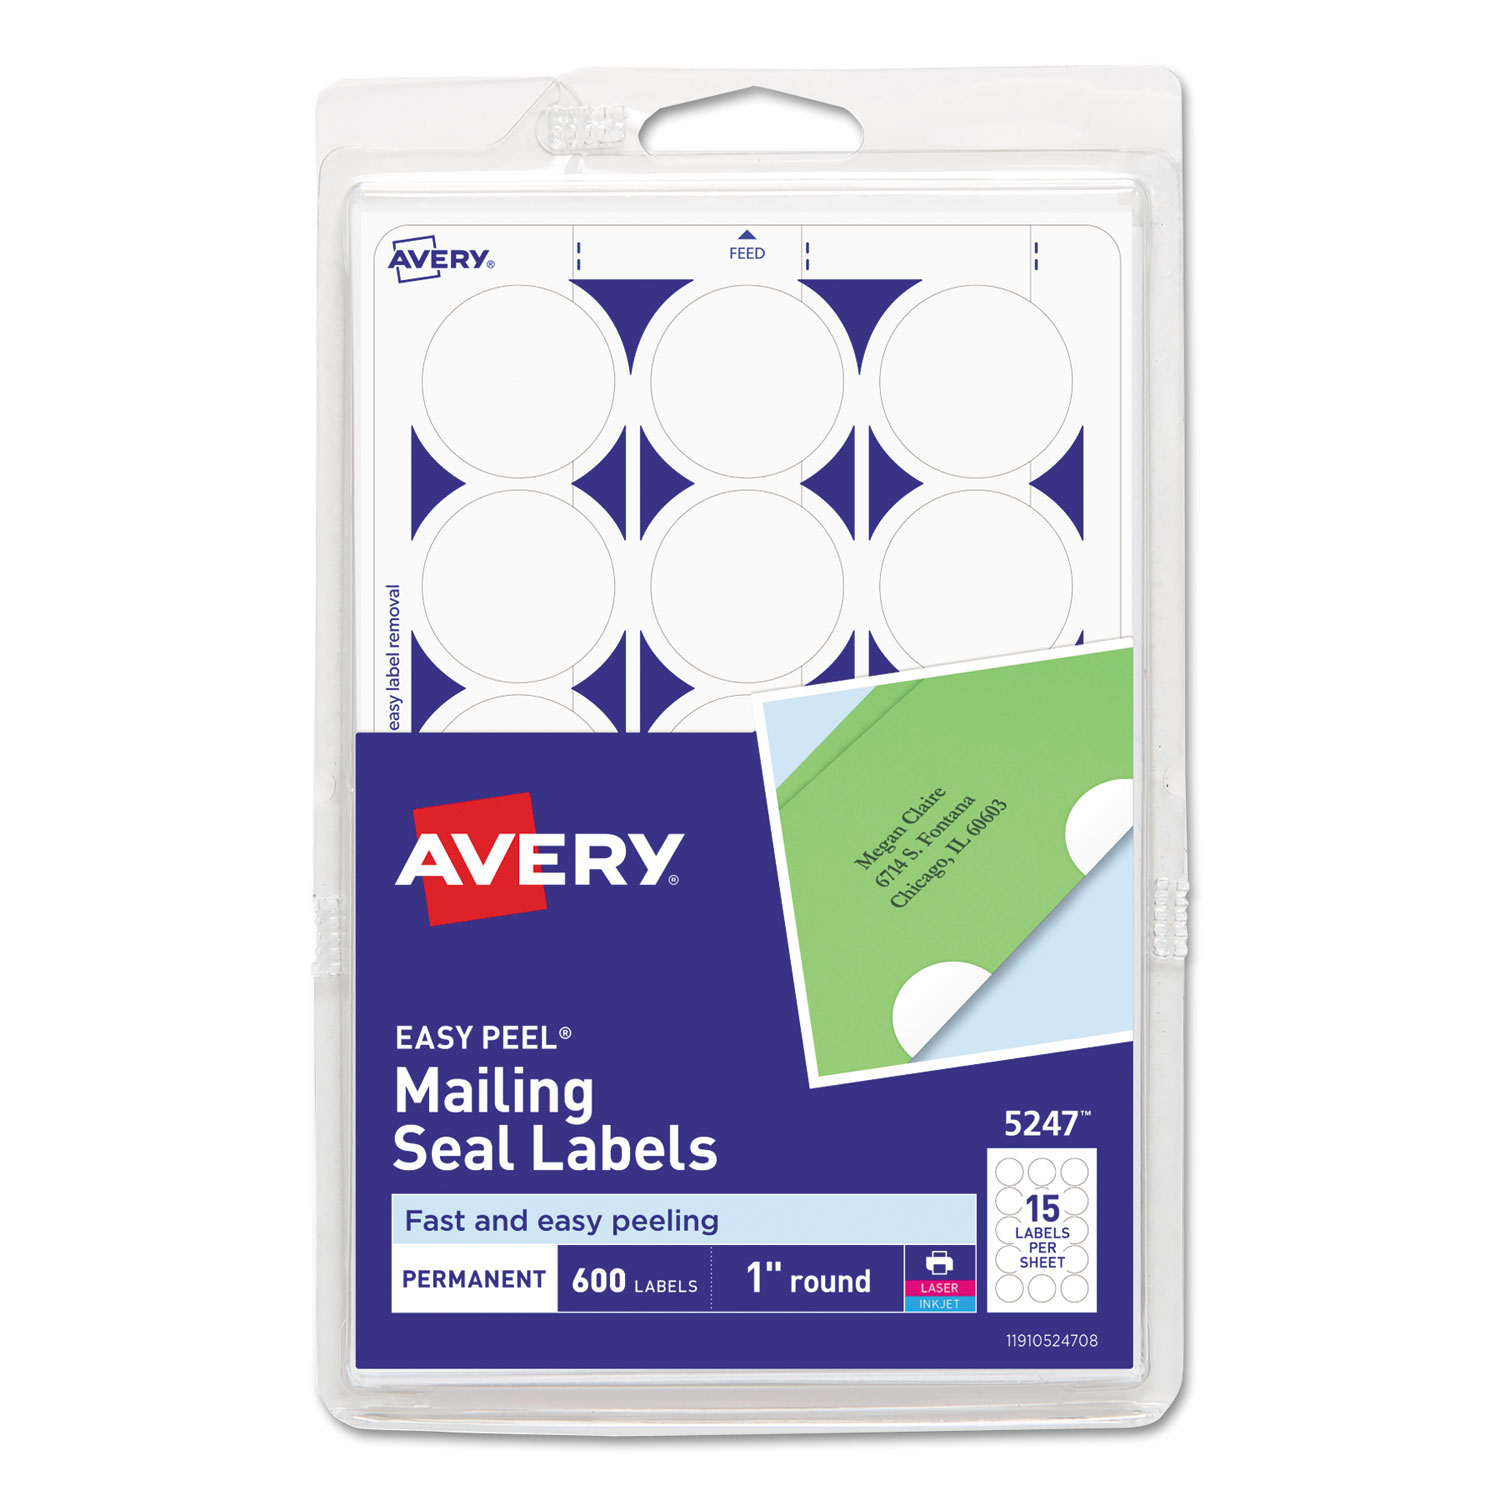  Avery 05247 Printable Mailing Seals, 1 dia., White, 15/Sheet, 40 Sheets/Pack (AVE05247) 